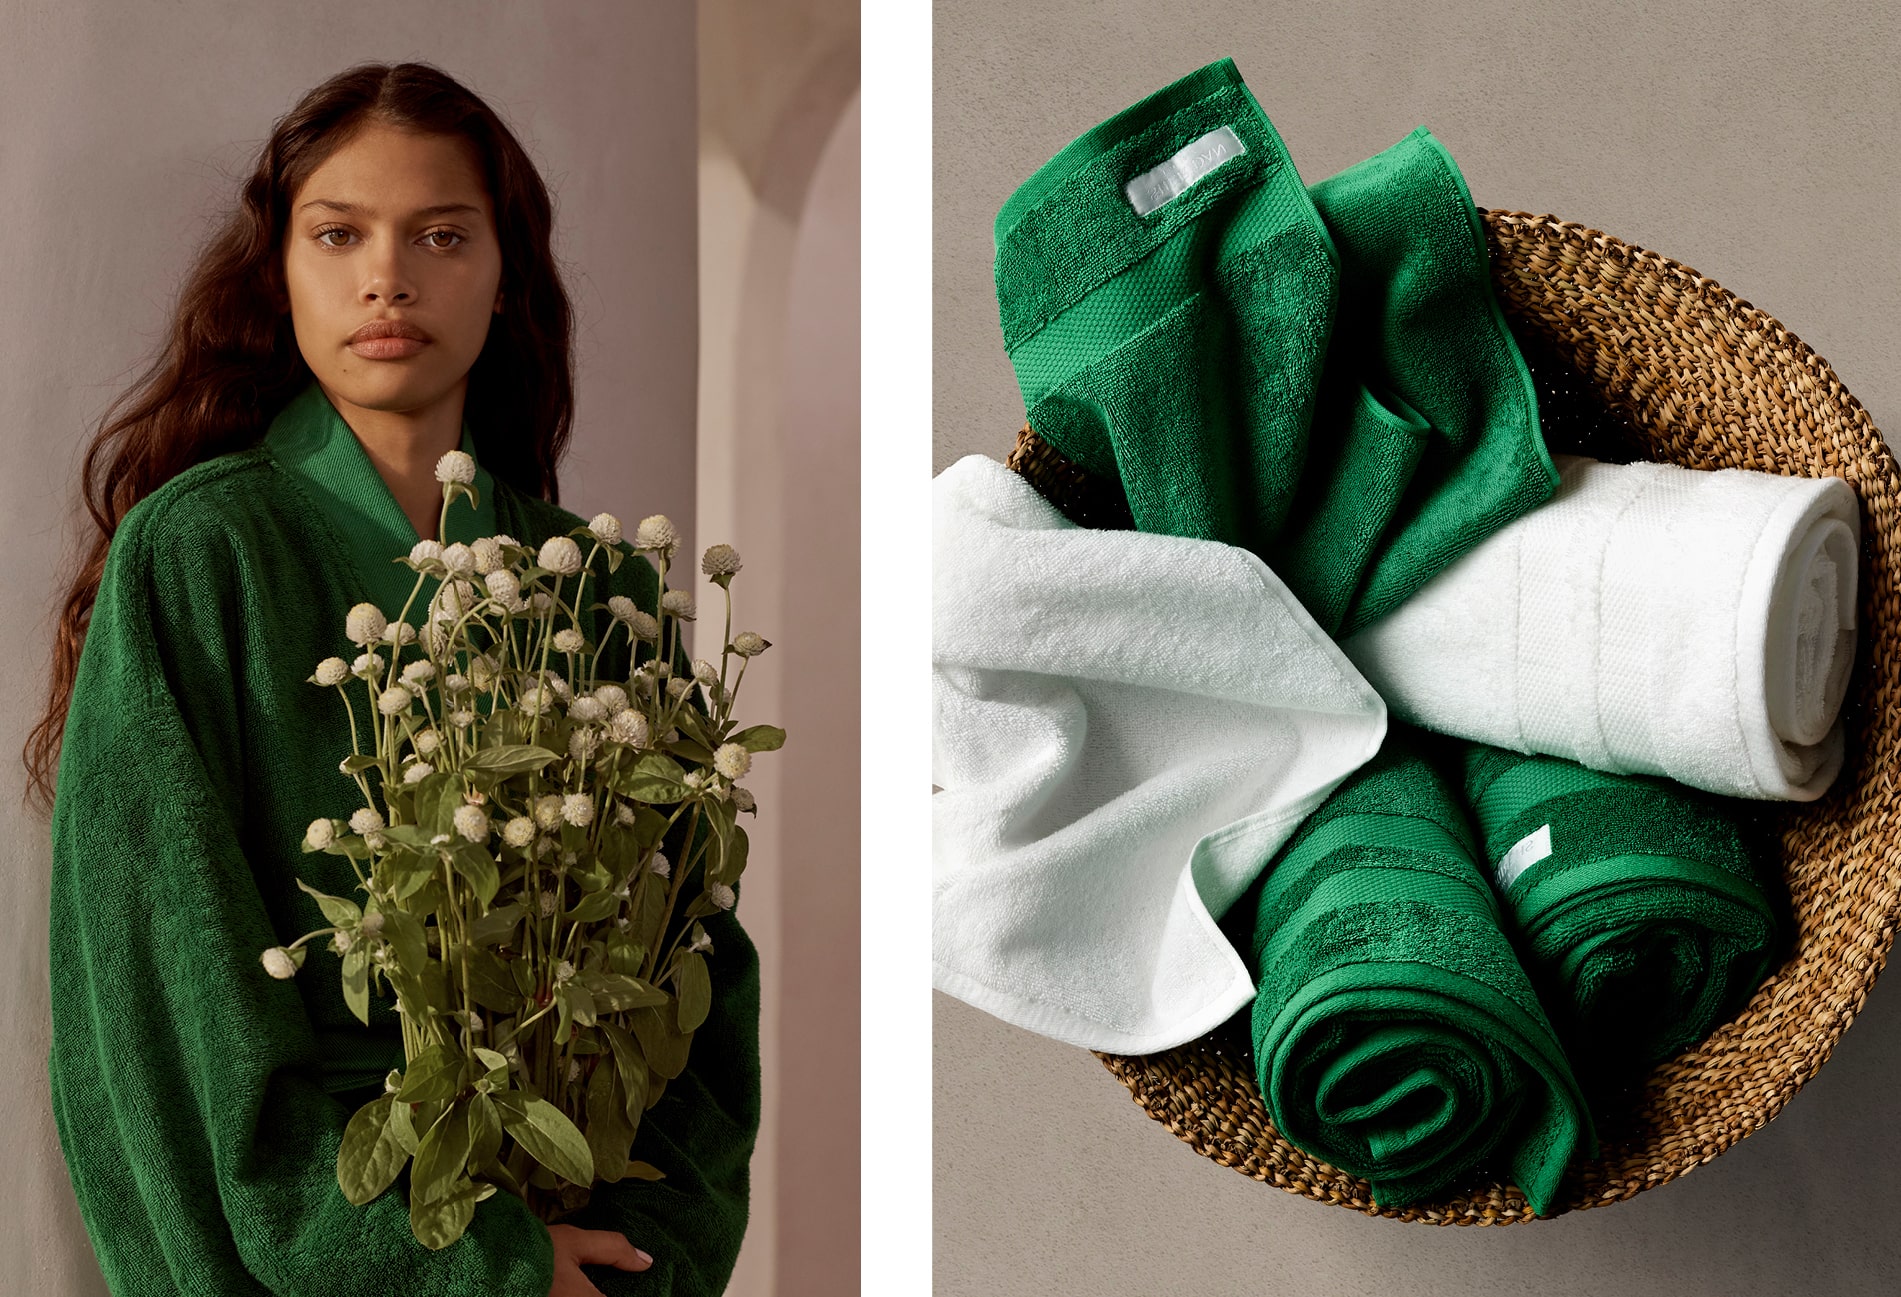 split image. left side dark skinned woman with wavy brown hair wears palm green cotton robe, holding a bunch of wildflowers. left side features three green towels, two white ones in a woven wicker basket; shot from above.